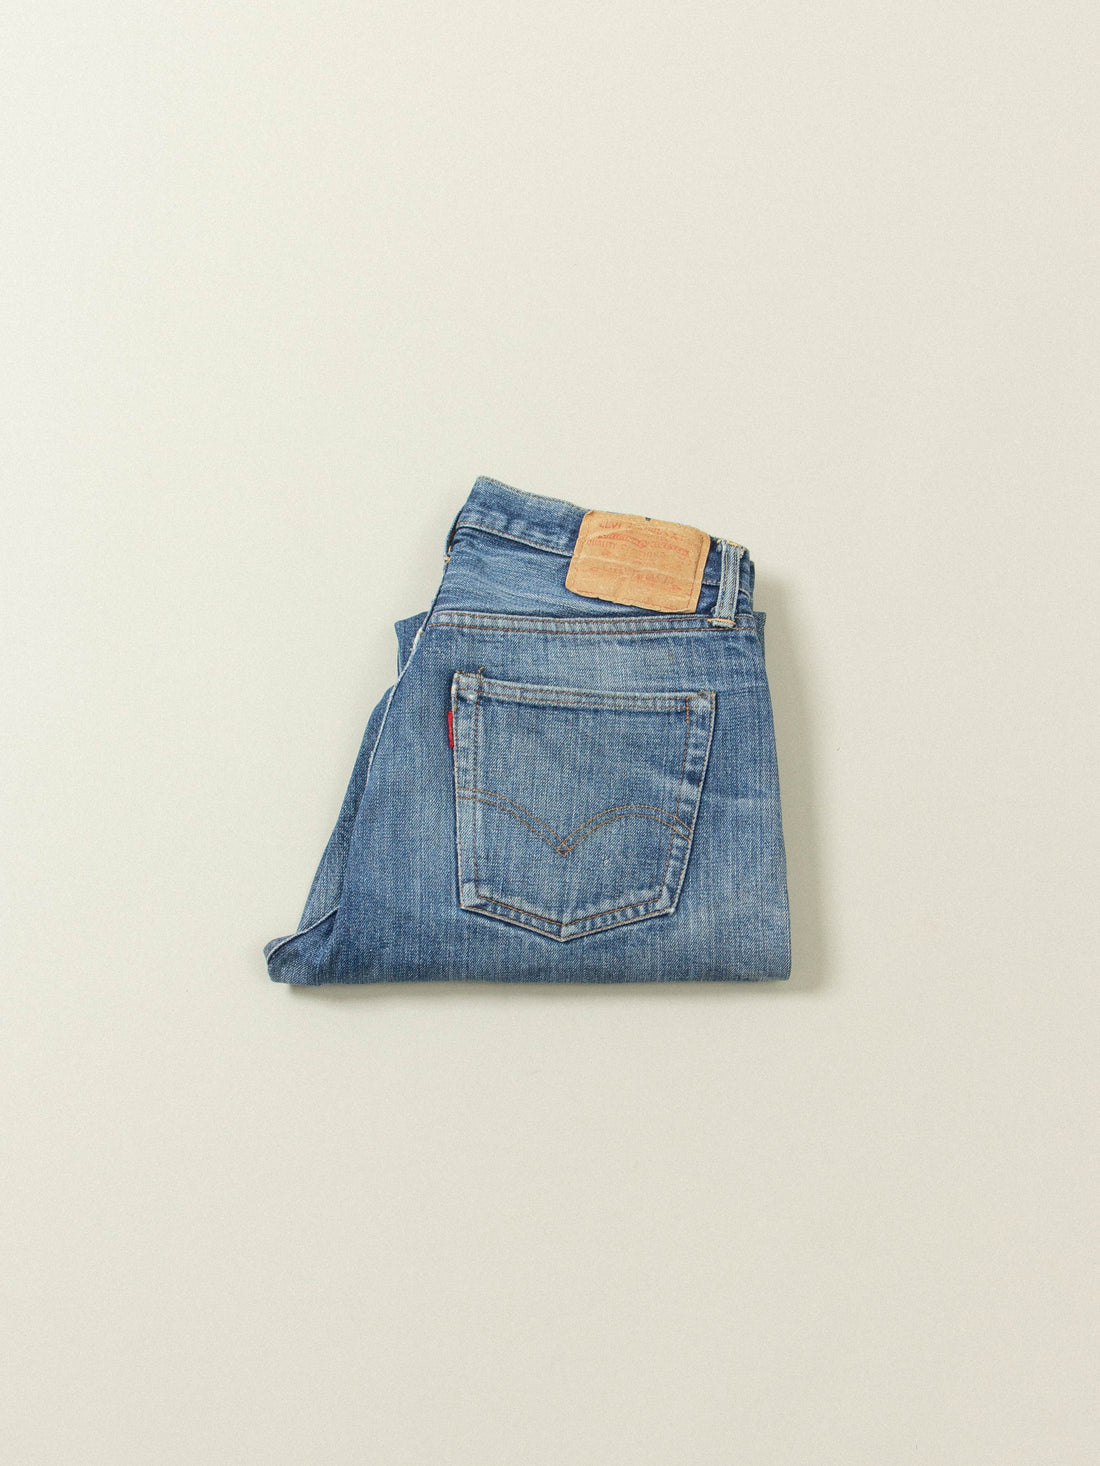 Vintage Levis 501XX Big E Selvedge Jeans 90's Made in San